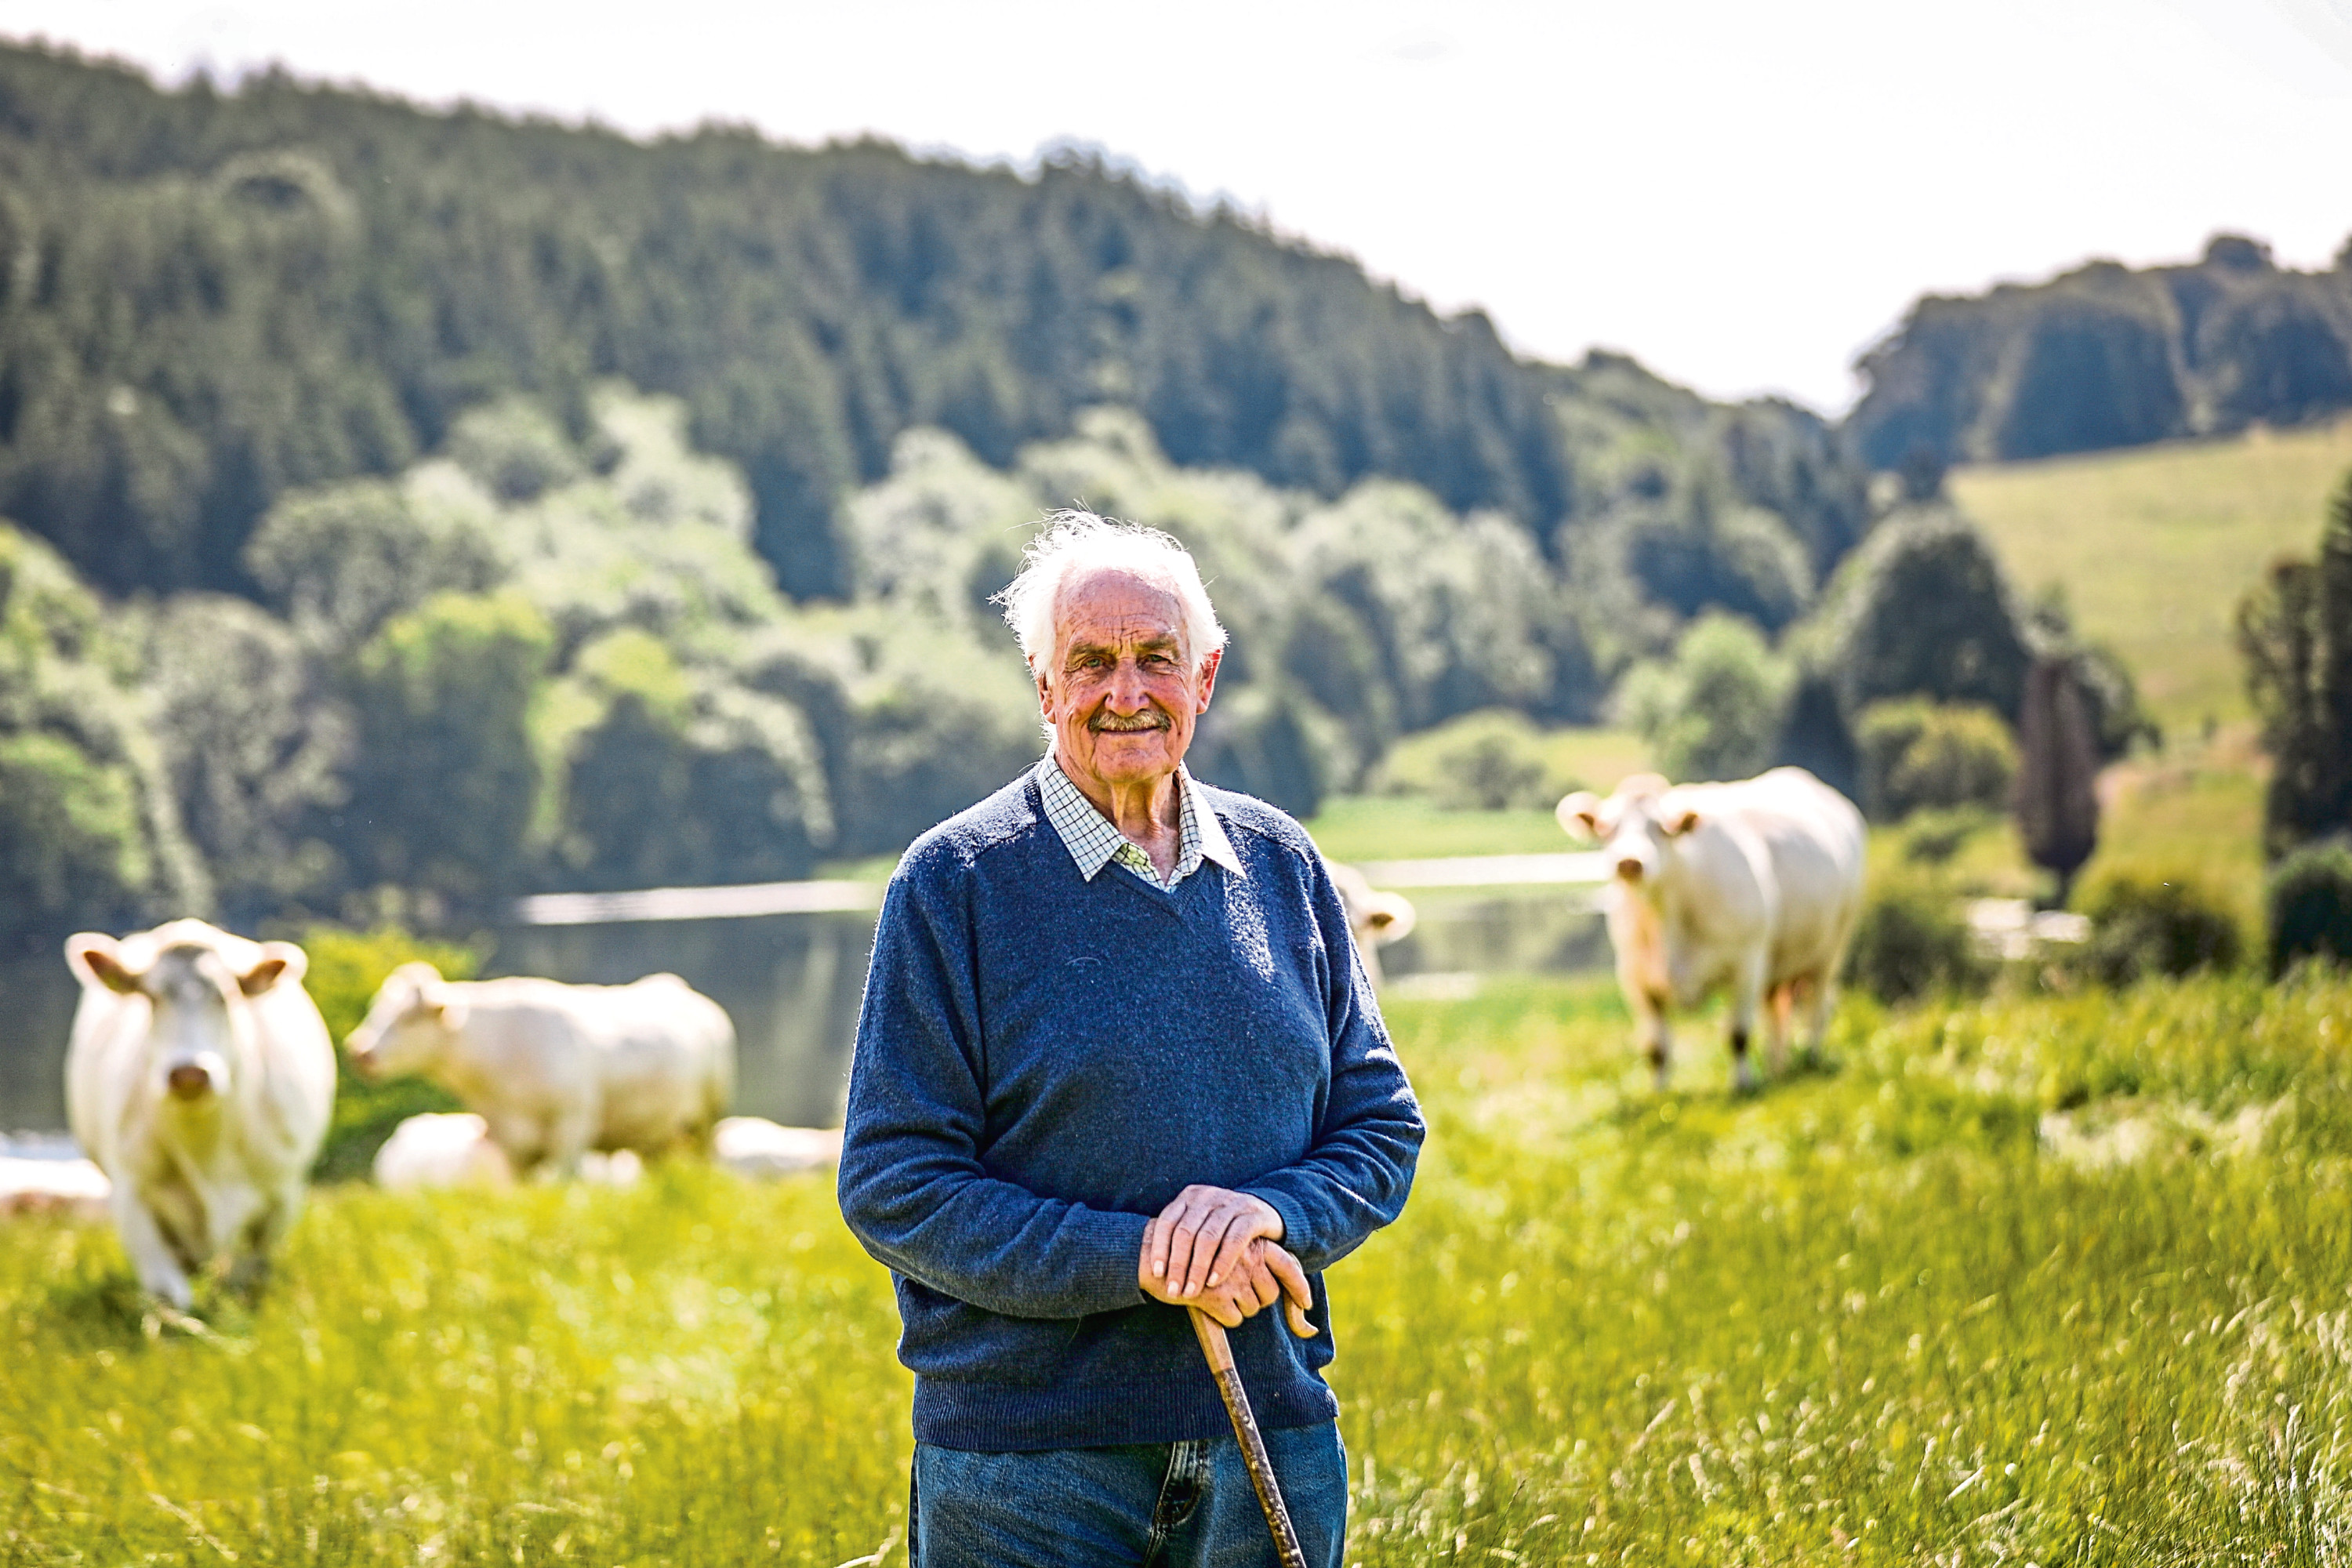 Major David Walter is celebrating 50 years as a successful Charolais cattle breeder